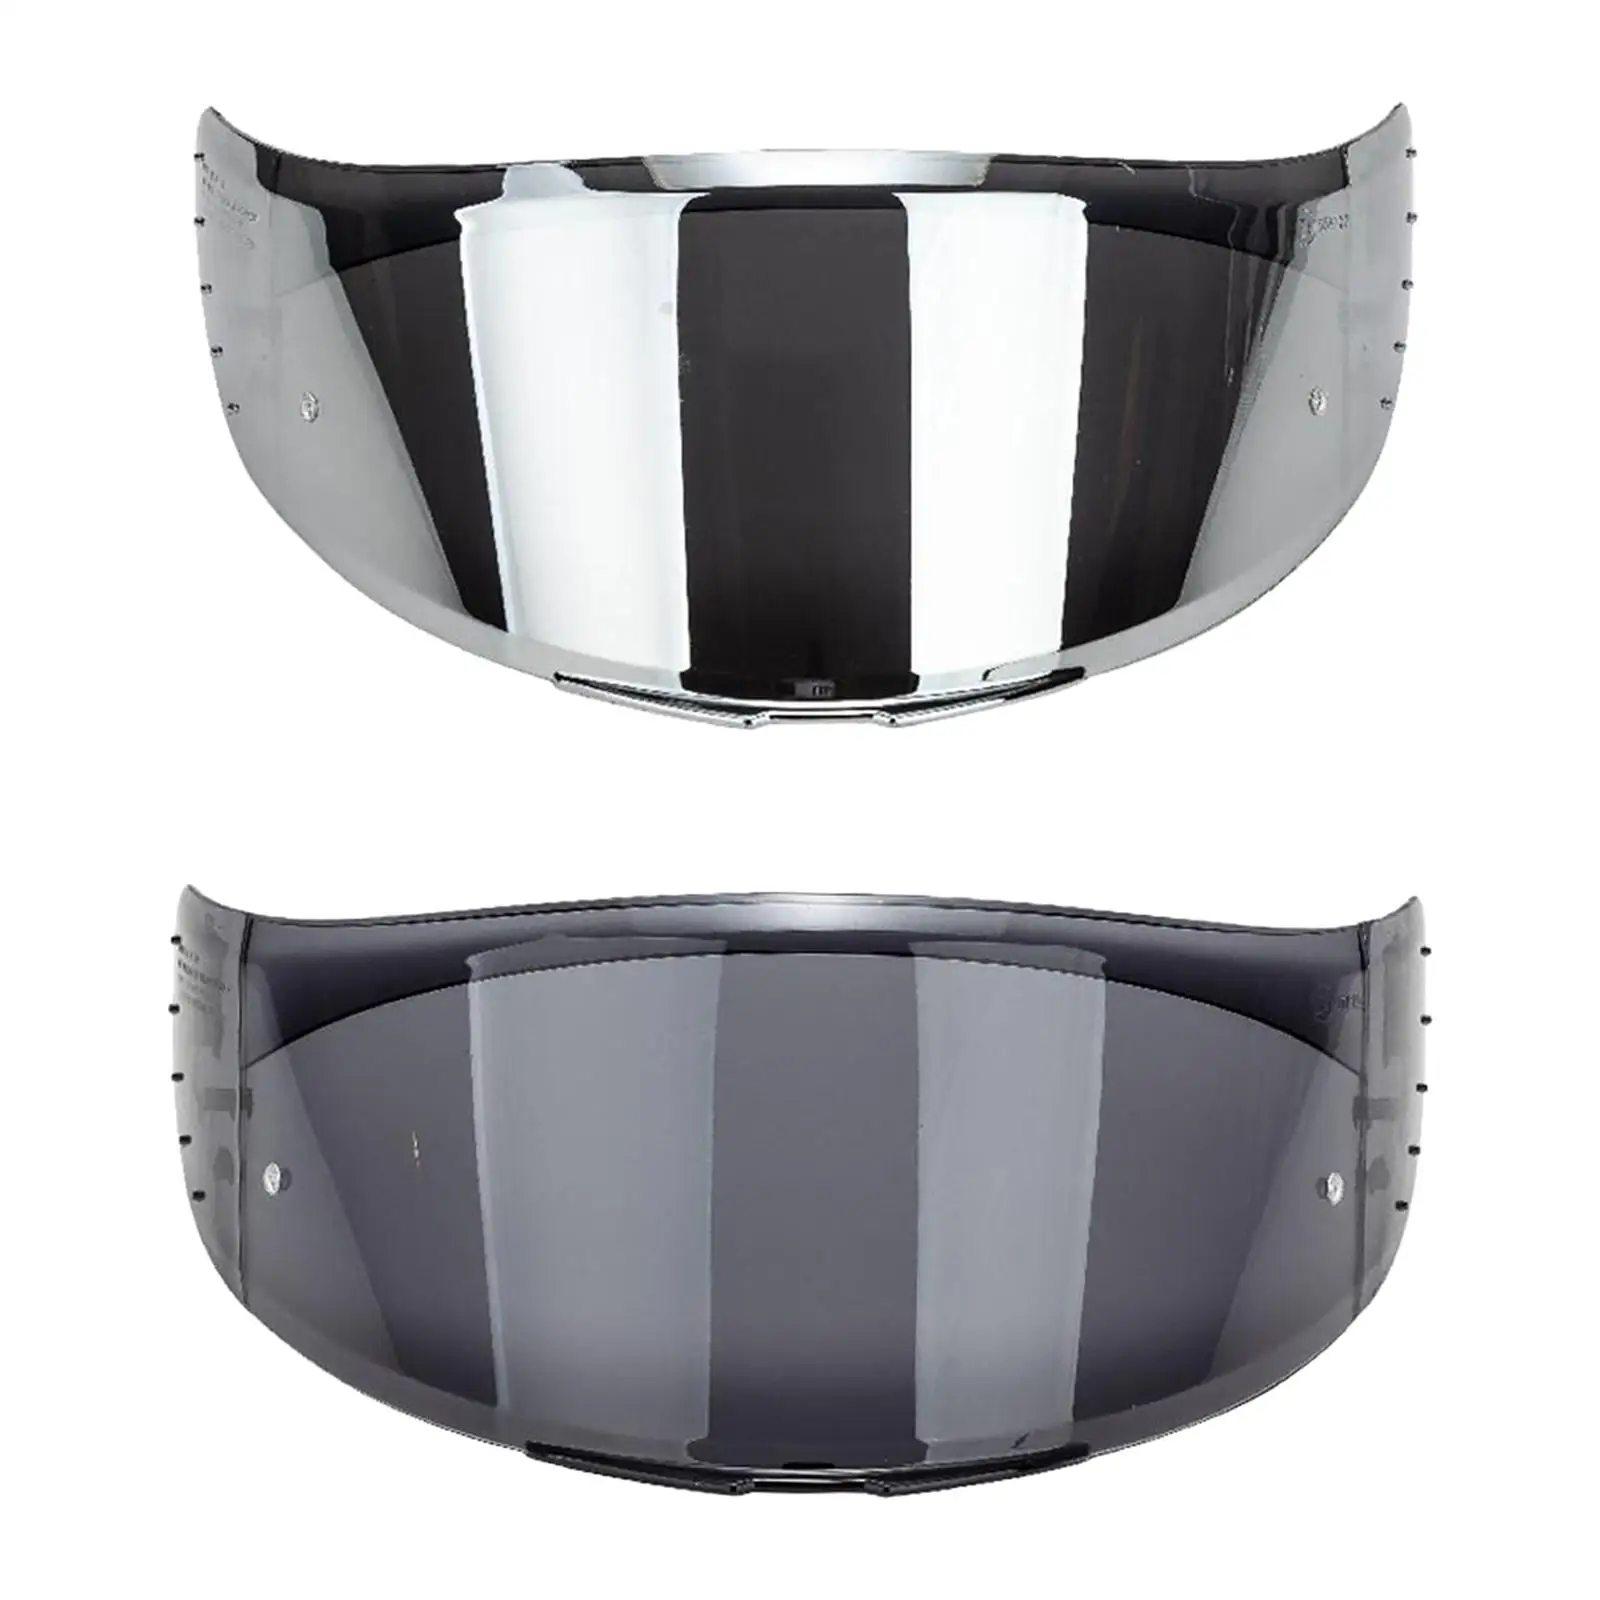 2 Pieces Full Face Shield Visor for Blade-2 Motorcycle Helmets